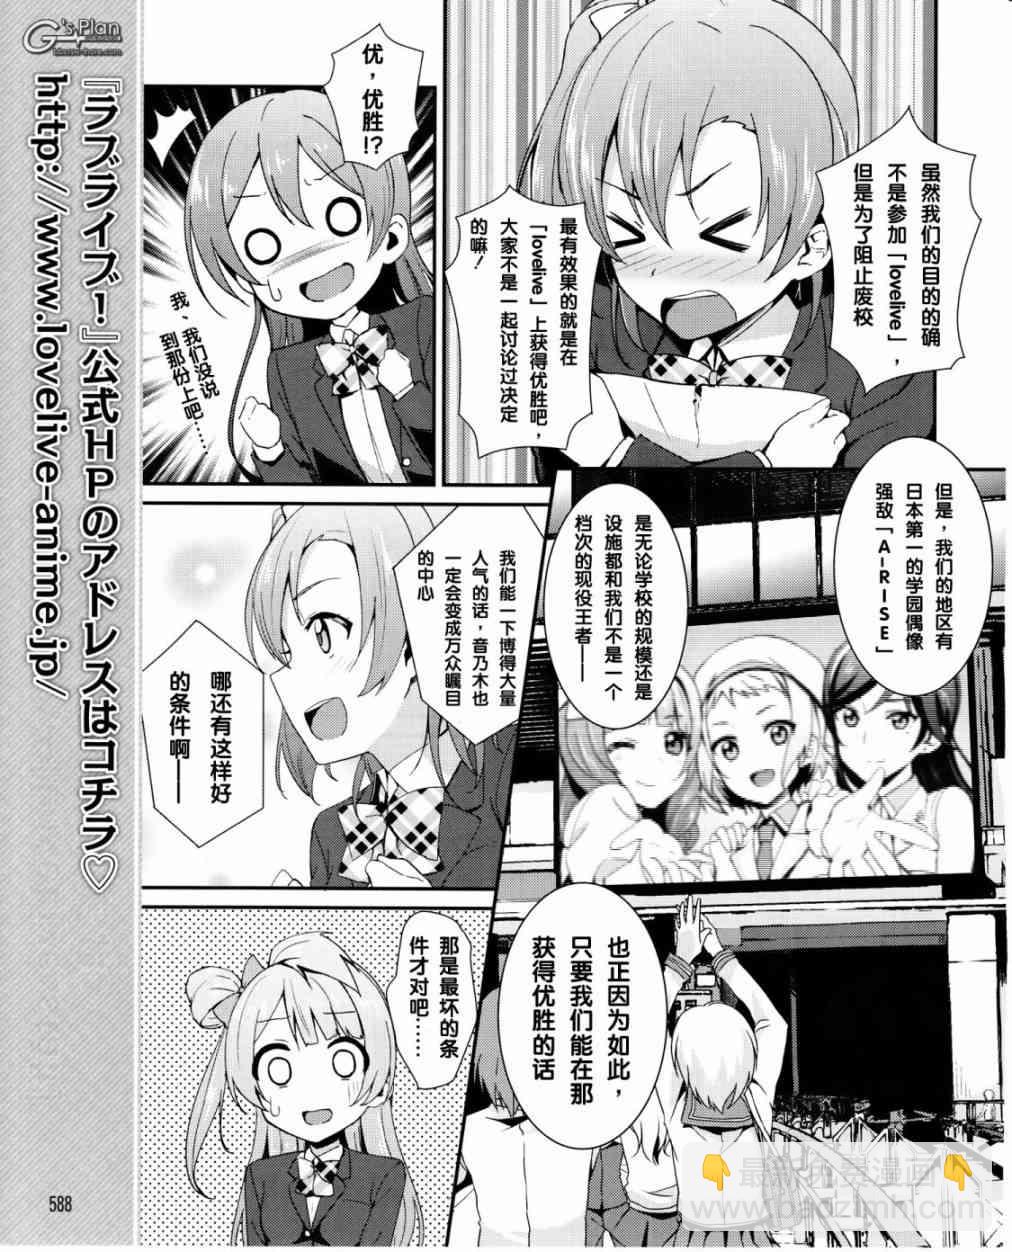 LoveLive - 16話 - 6